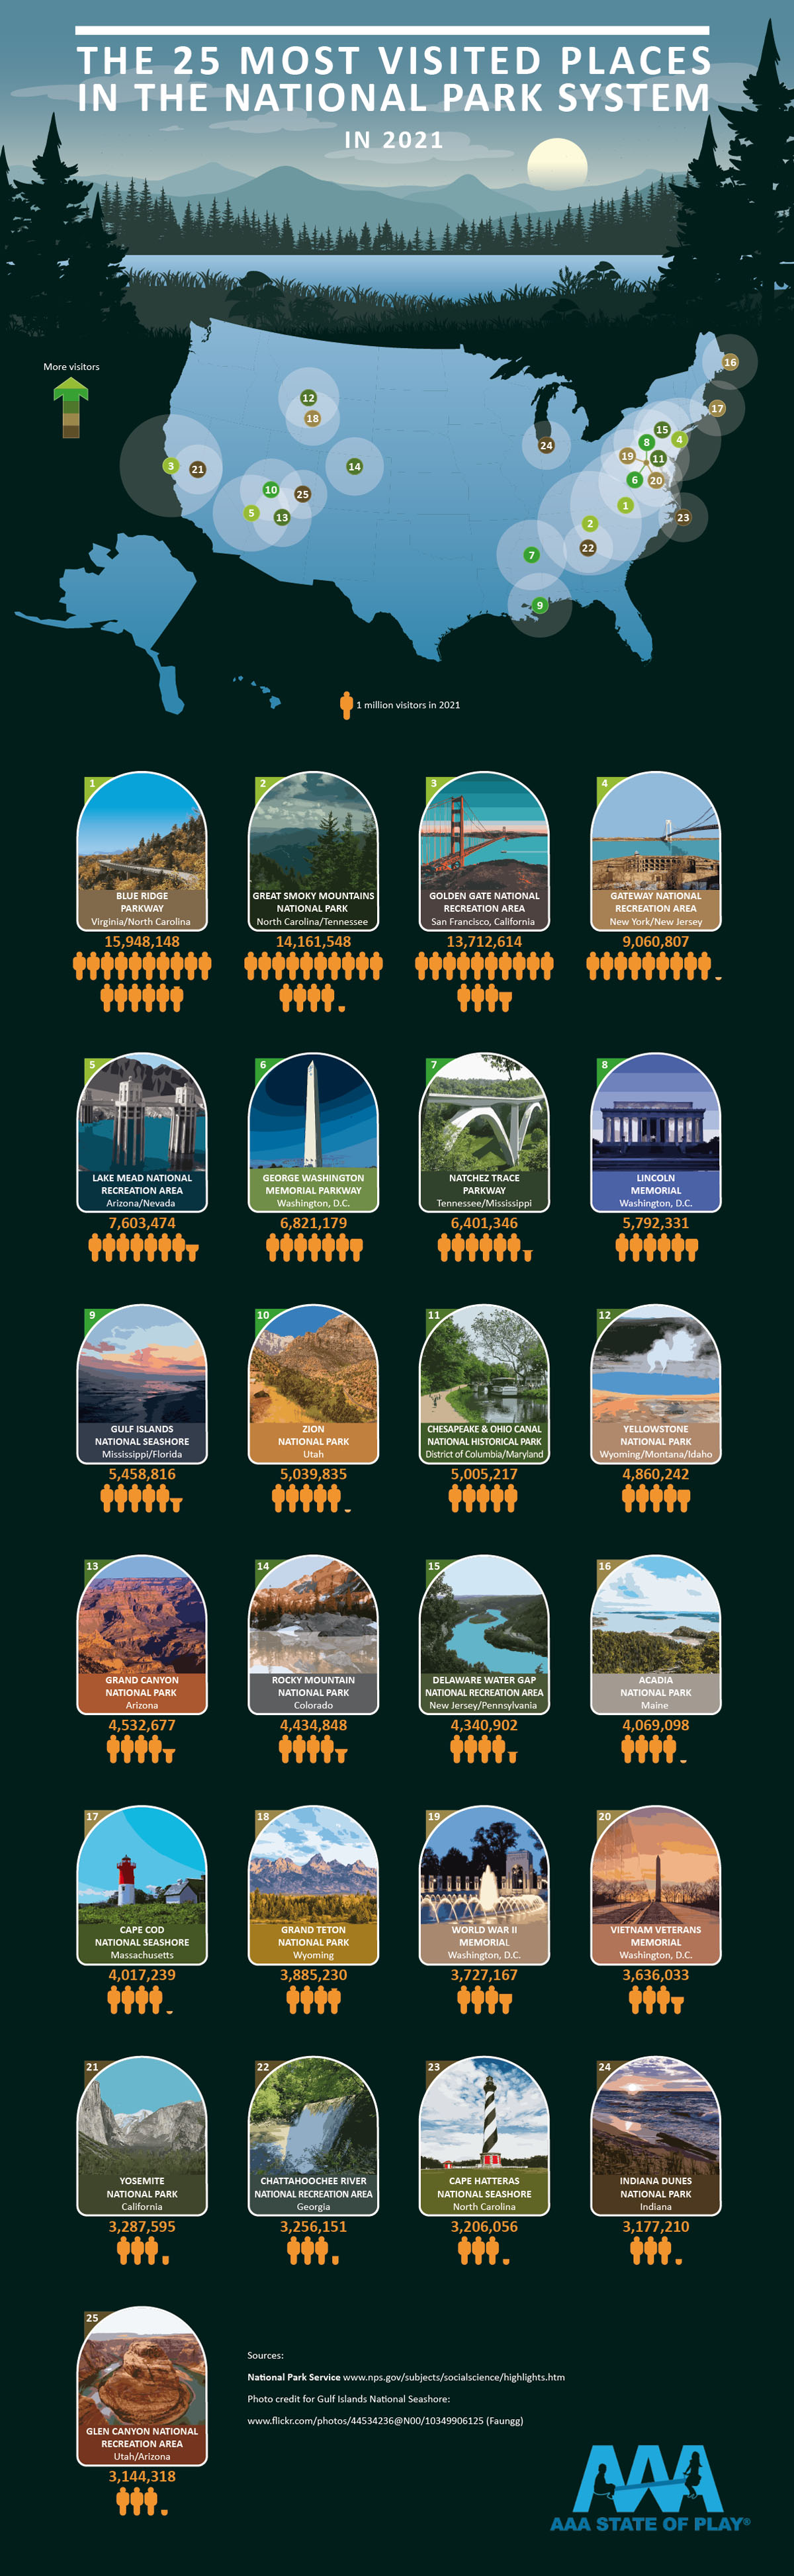 The 25 Most Visited Places in the National Park System